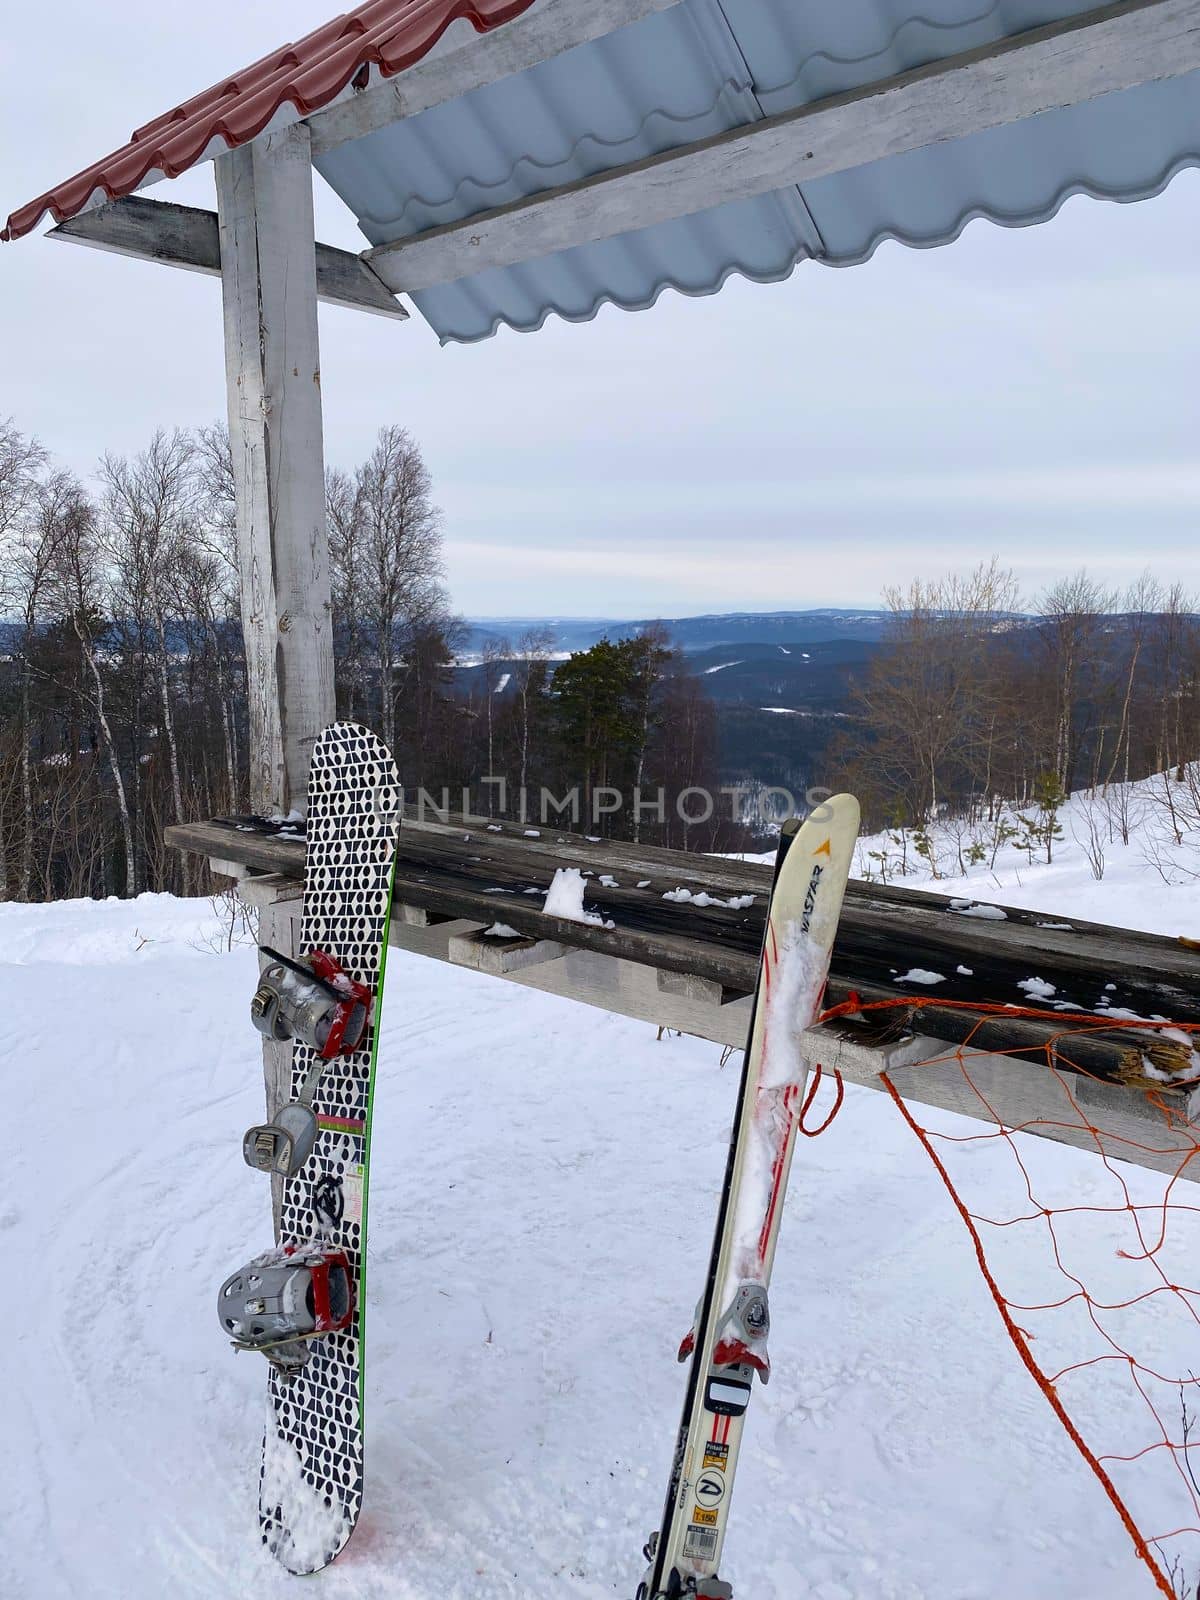 Mount Zavyalikha, Russia, February 13, 2021. The photo shows a view from the mountain, in the foreground a snowboard, skiing.